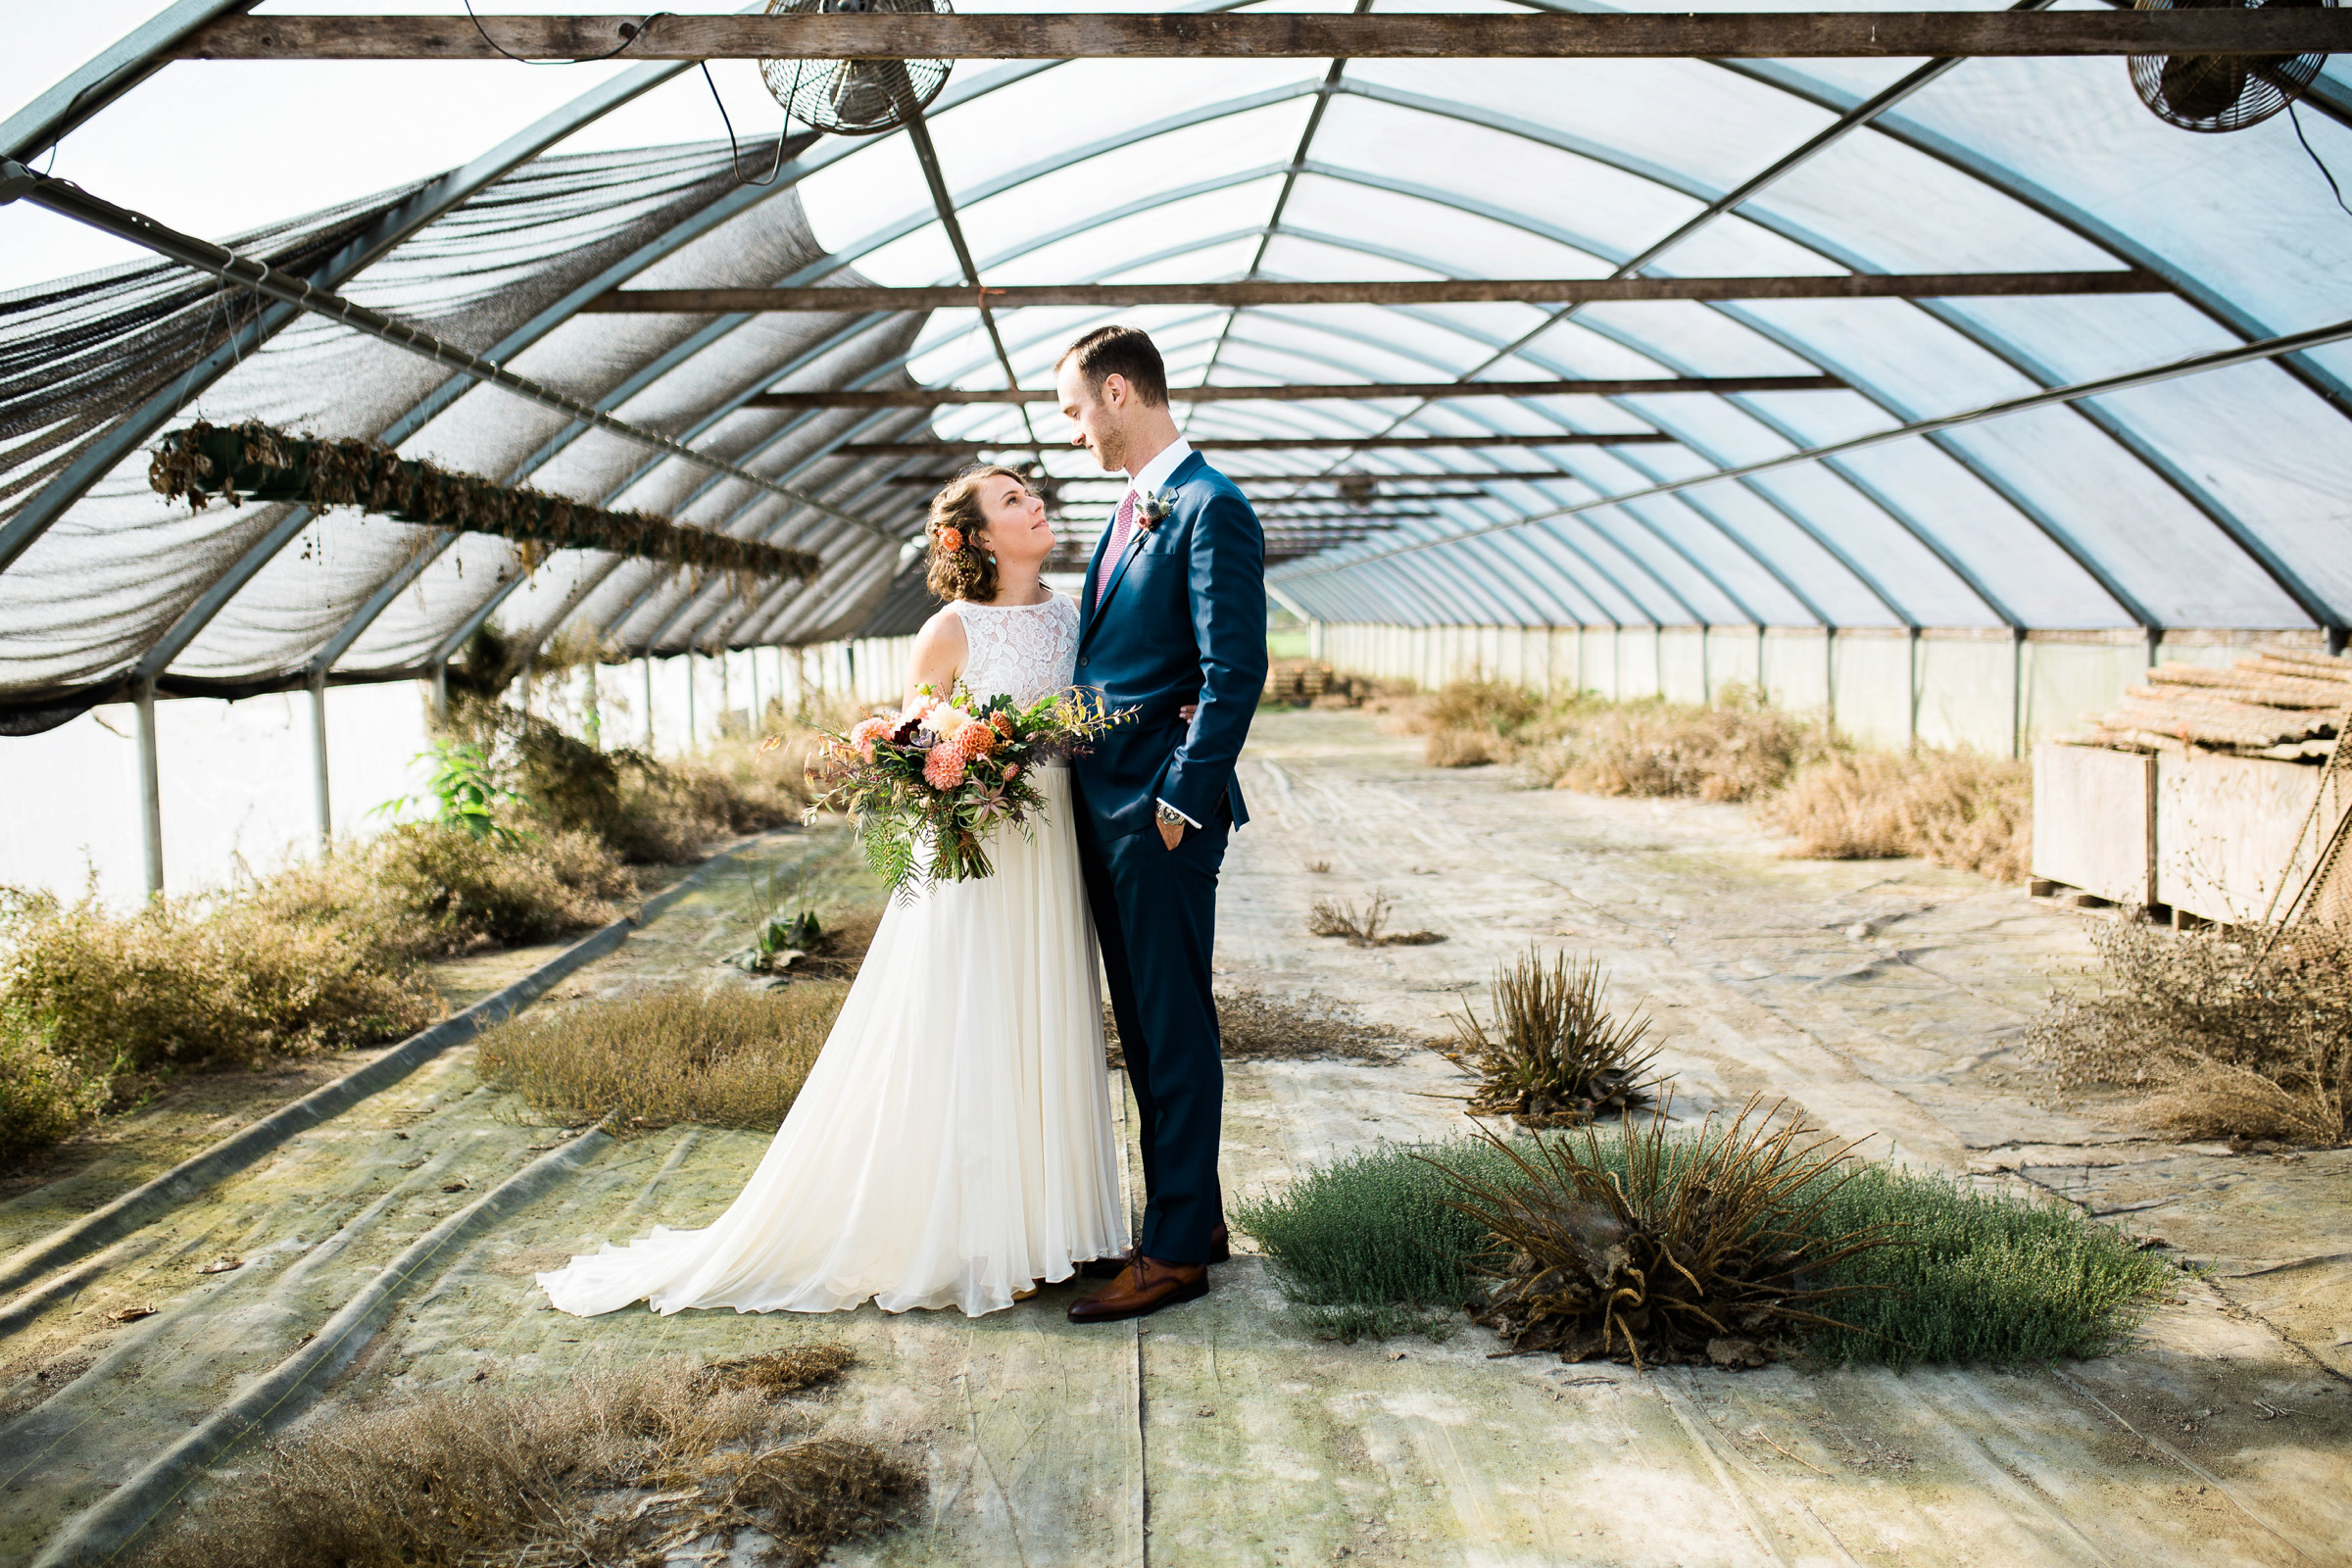 10-the-Fields-at-Willie-Greens-Wedding-Venue-Seattle-Photographer-bride-groom-portraits-Photography